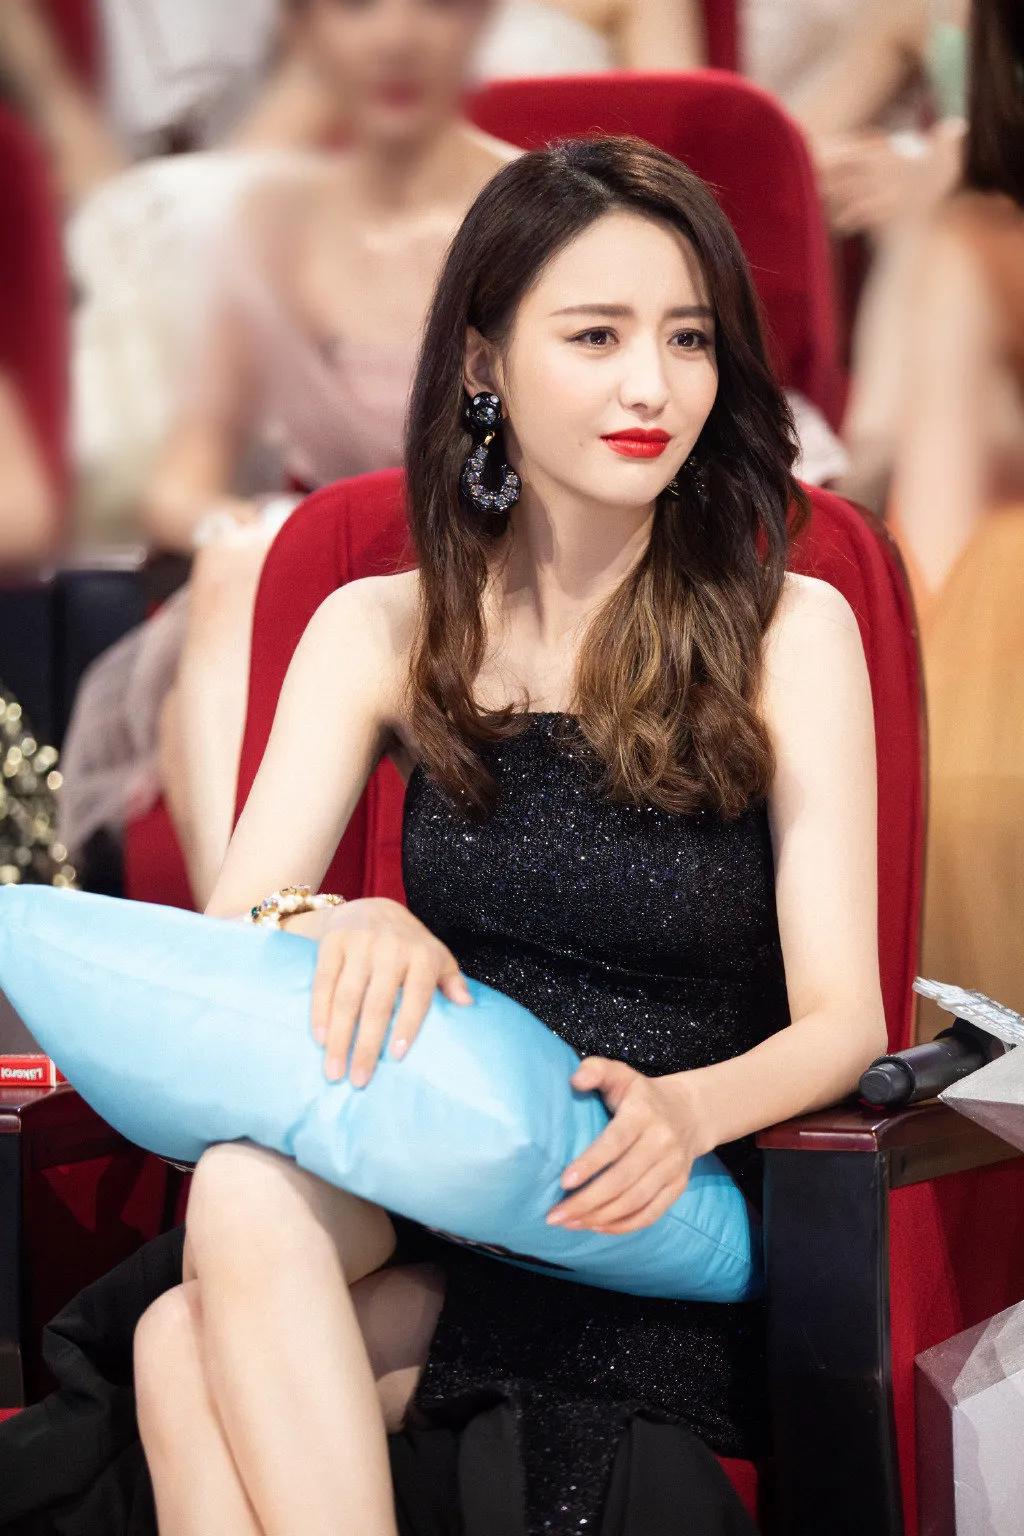 Tong Liya Wears A Black Dress With A Tube Top And Flashing Diamonds With Red Lips And Long Hair 